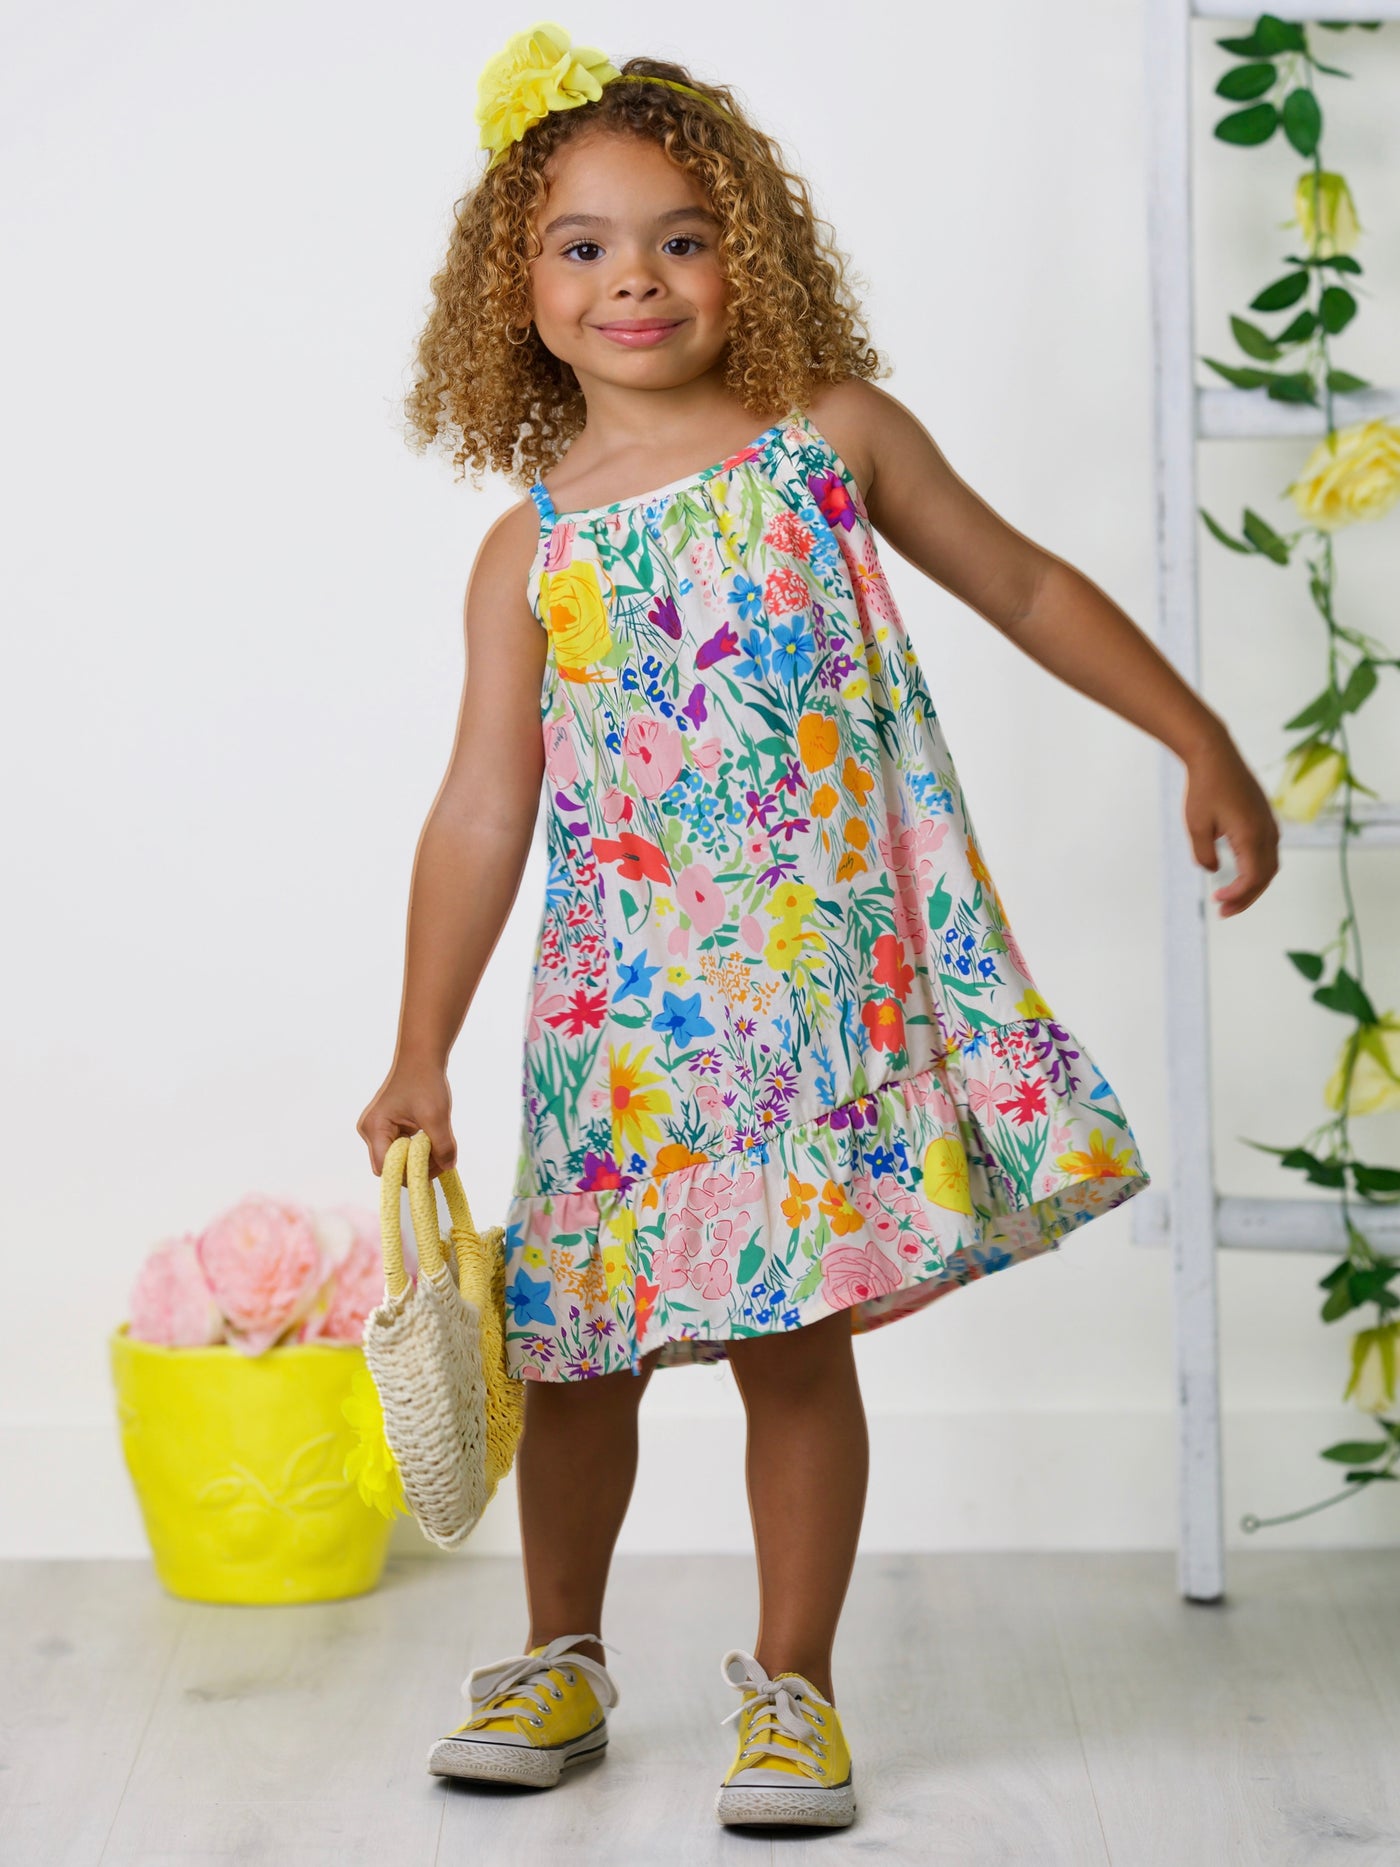 Mia Belle Girls Floral Ruffle Dress And Bag Set | Girls Spring Outfits